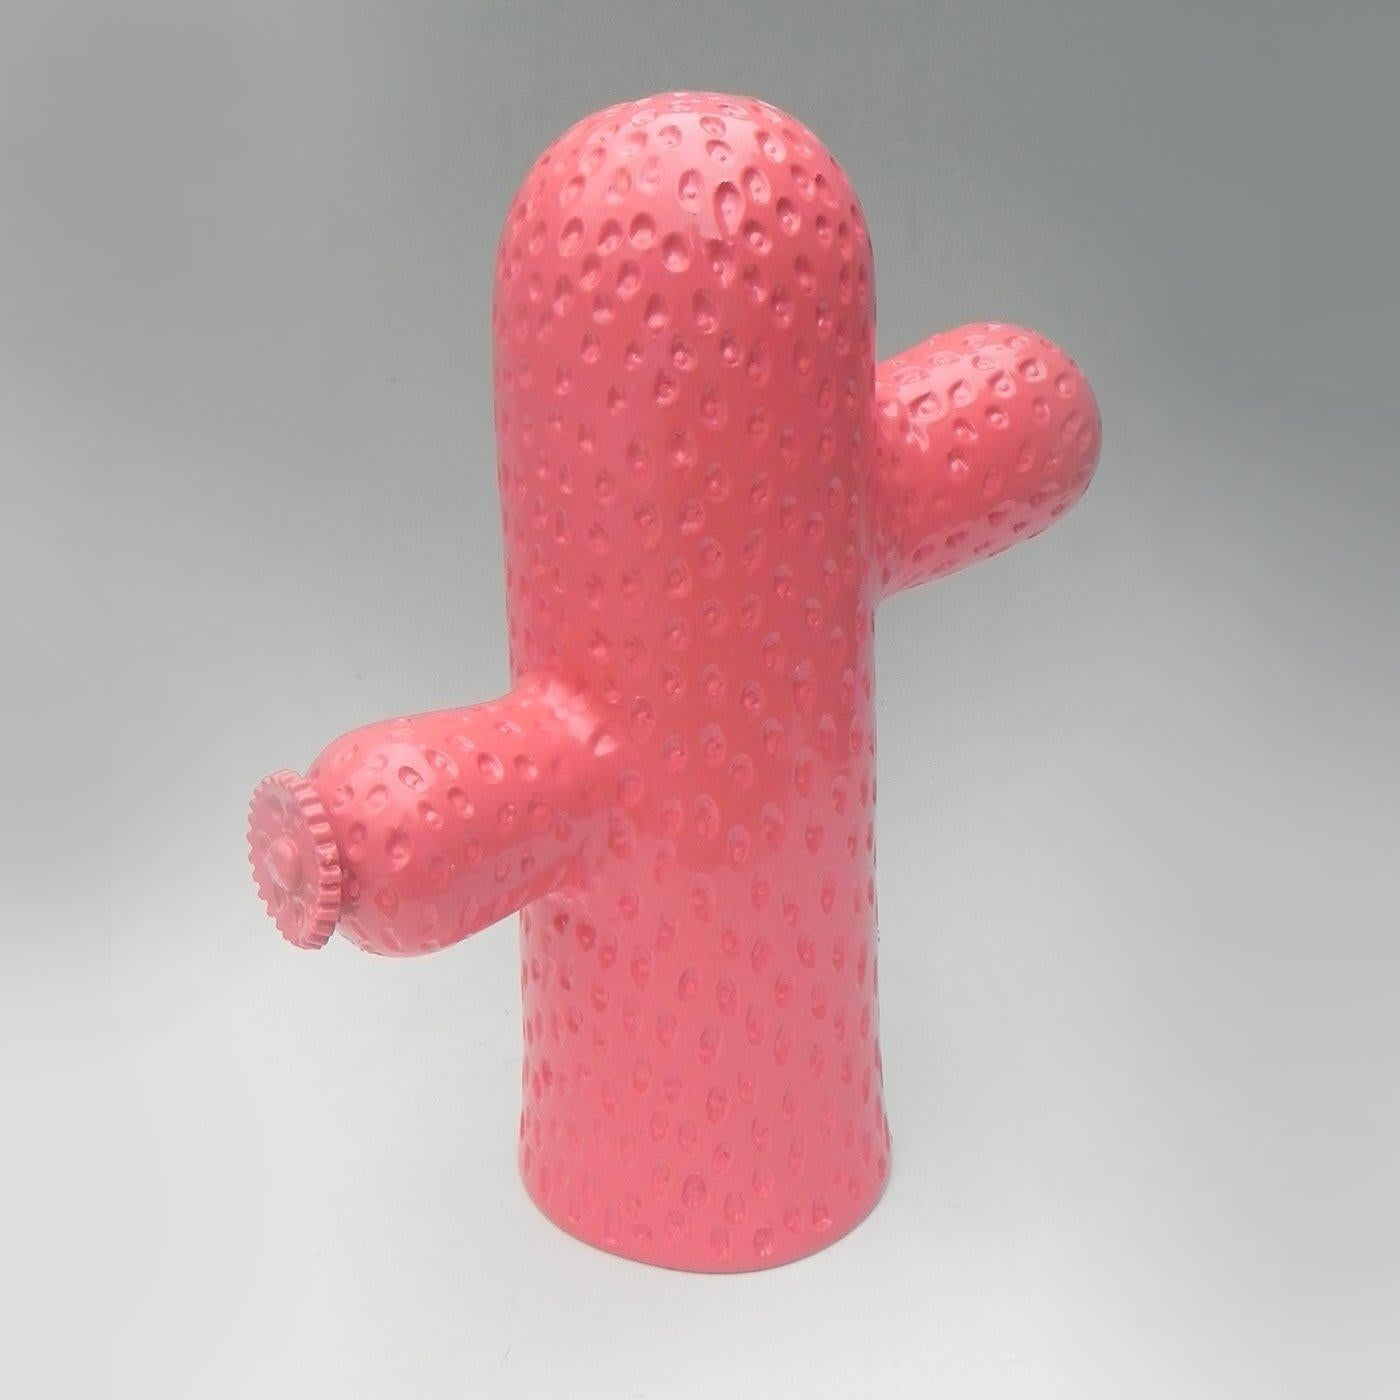 Two-Arm Cactus Sculpture By Mazzotti 1903 In New Condition For Sale In Milan, IT